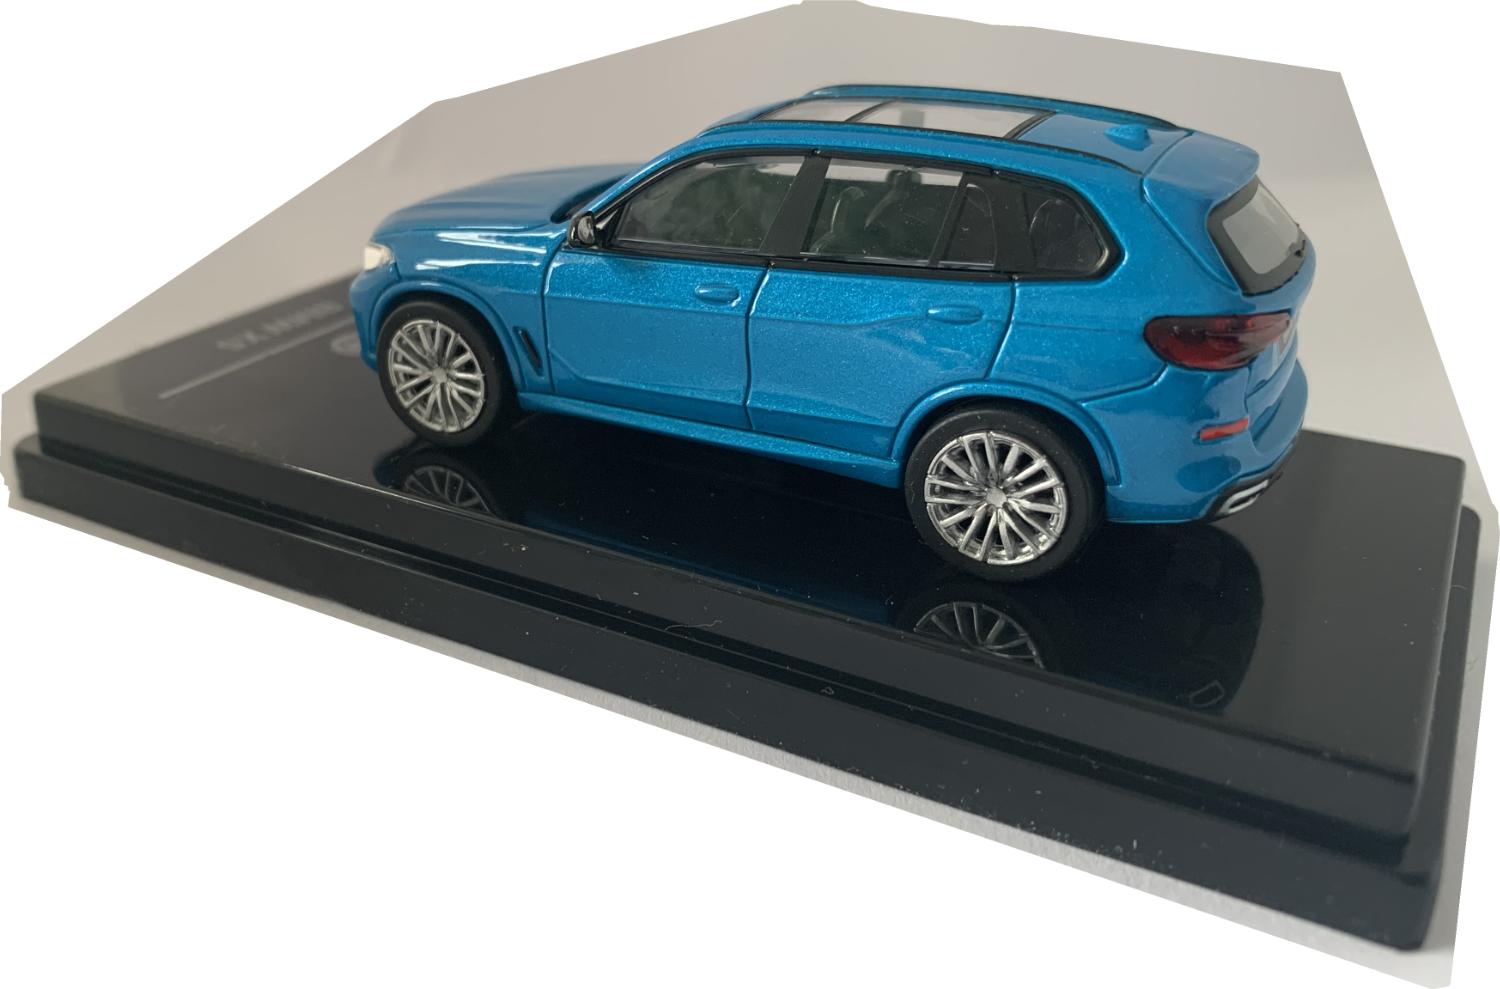 BMW X5 (G05) 2018 in atlantis 1:64 scale model from Paragon Models